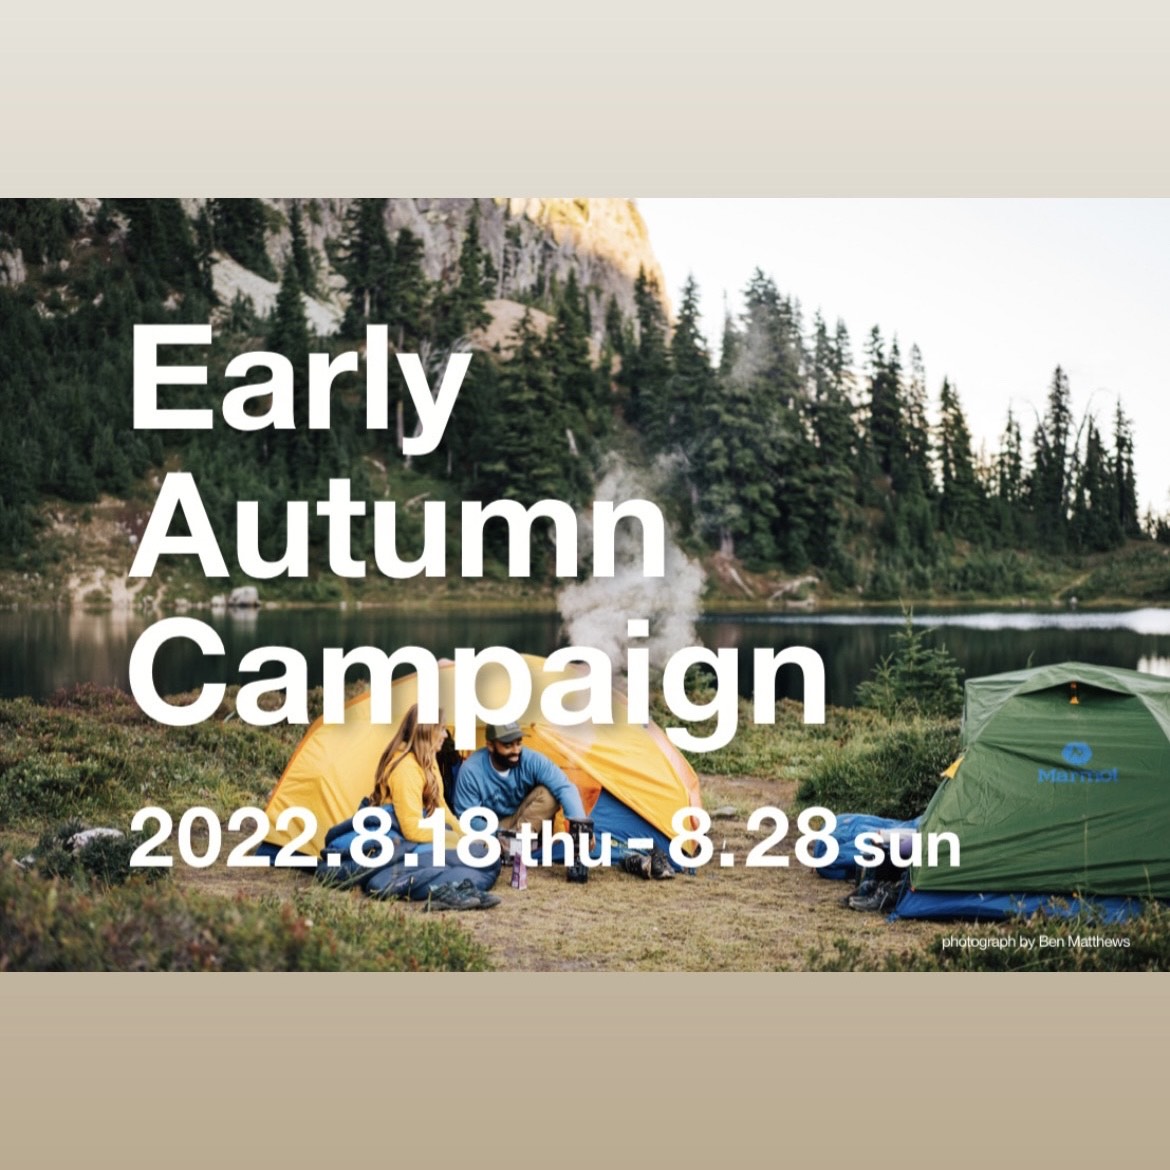 【Early Autumn Campaign】